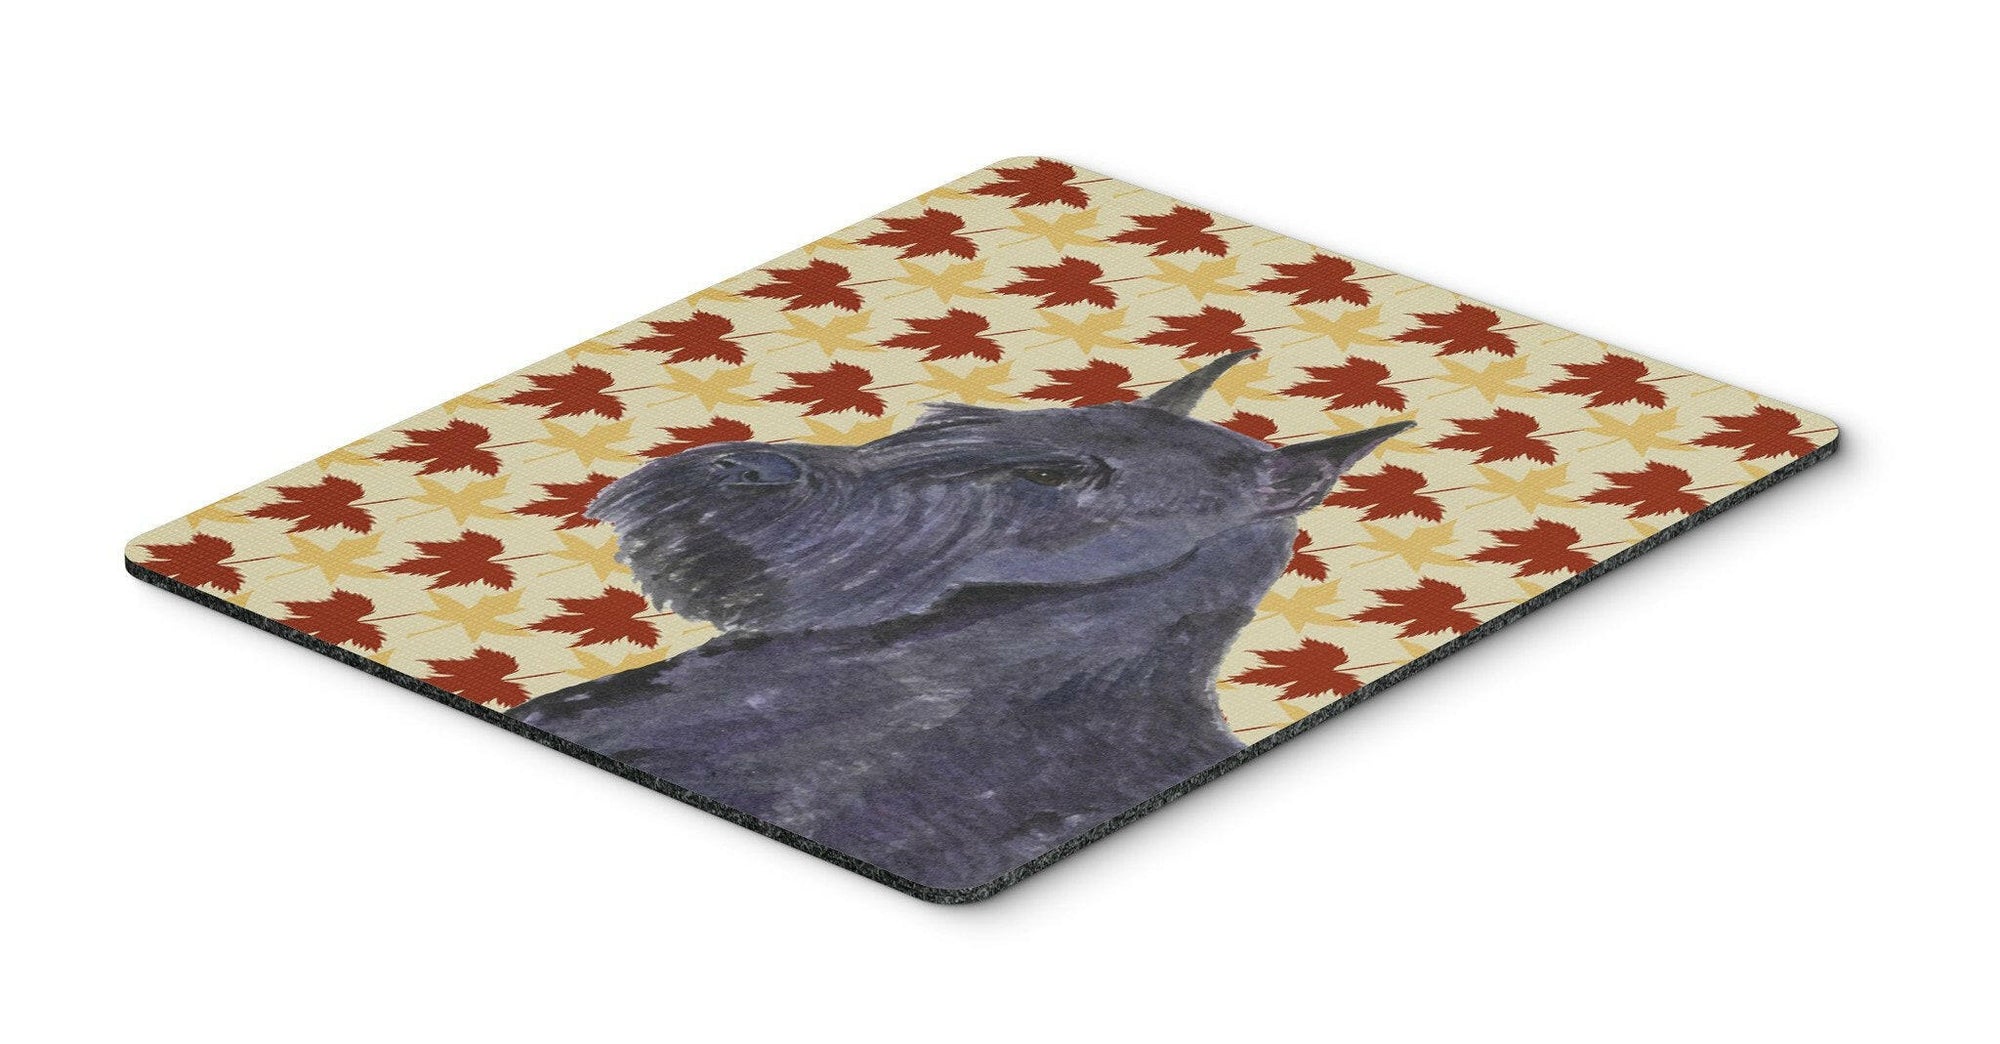 Schnauzer Giant Fall Leaves Portrait Mouse Pad, Hot Pad or Trivet by Caroline's Treasures